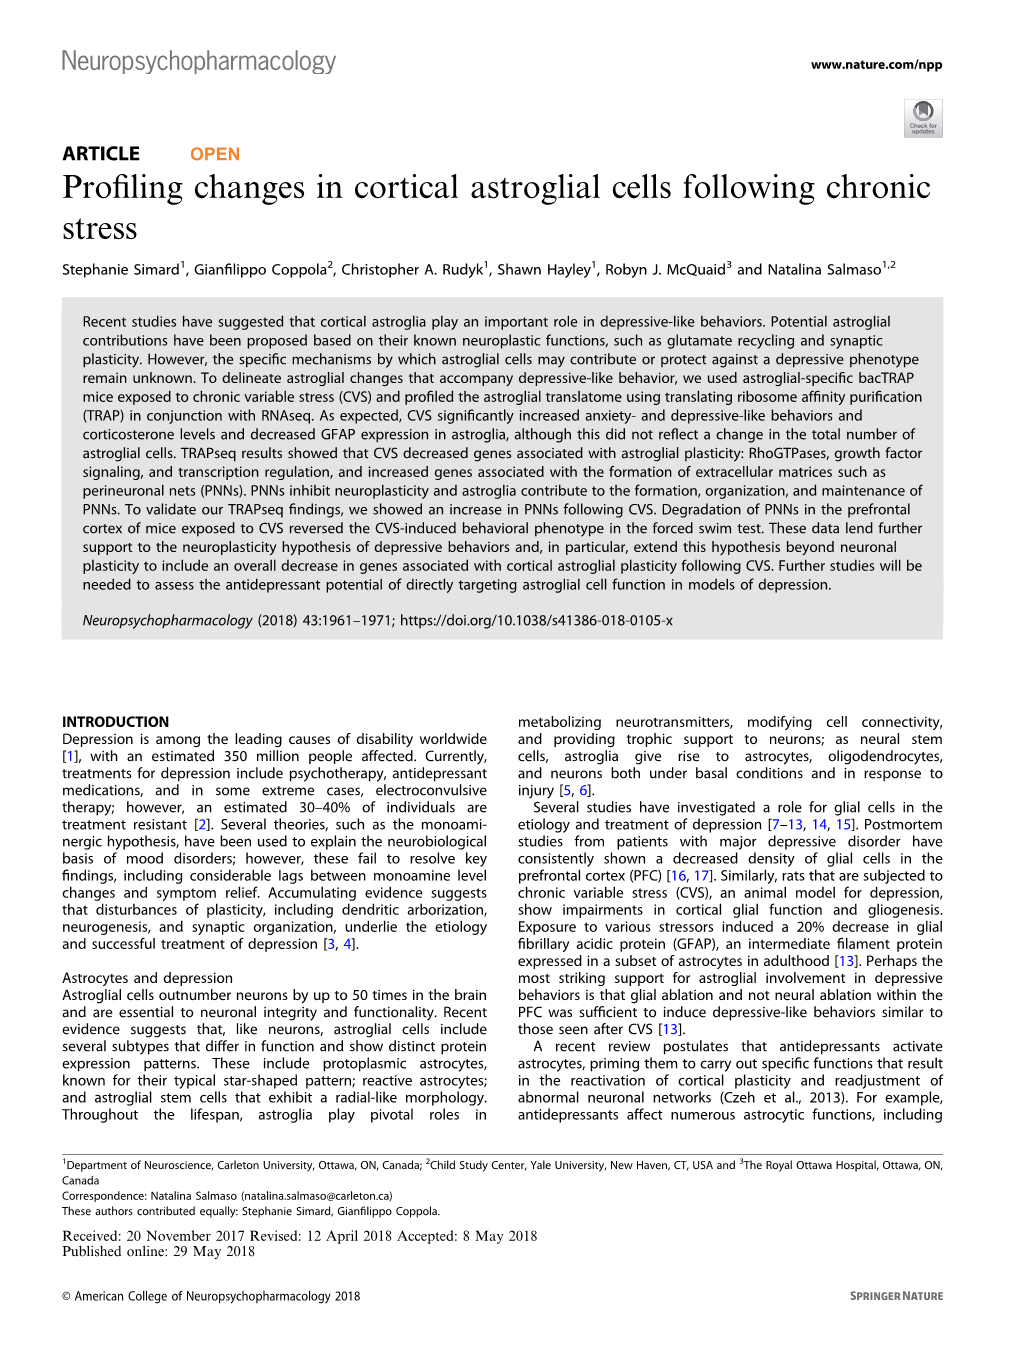 Profiling Changes in Cortical Astroglial Cells Following Chronic Stress